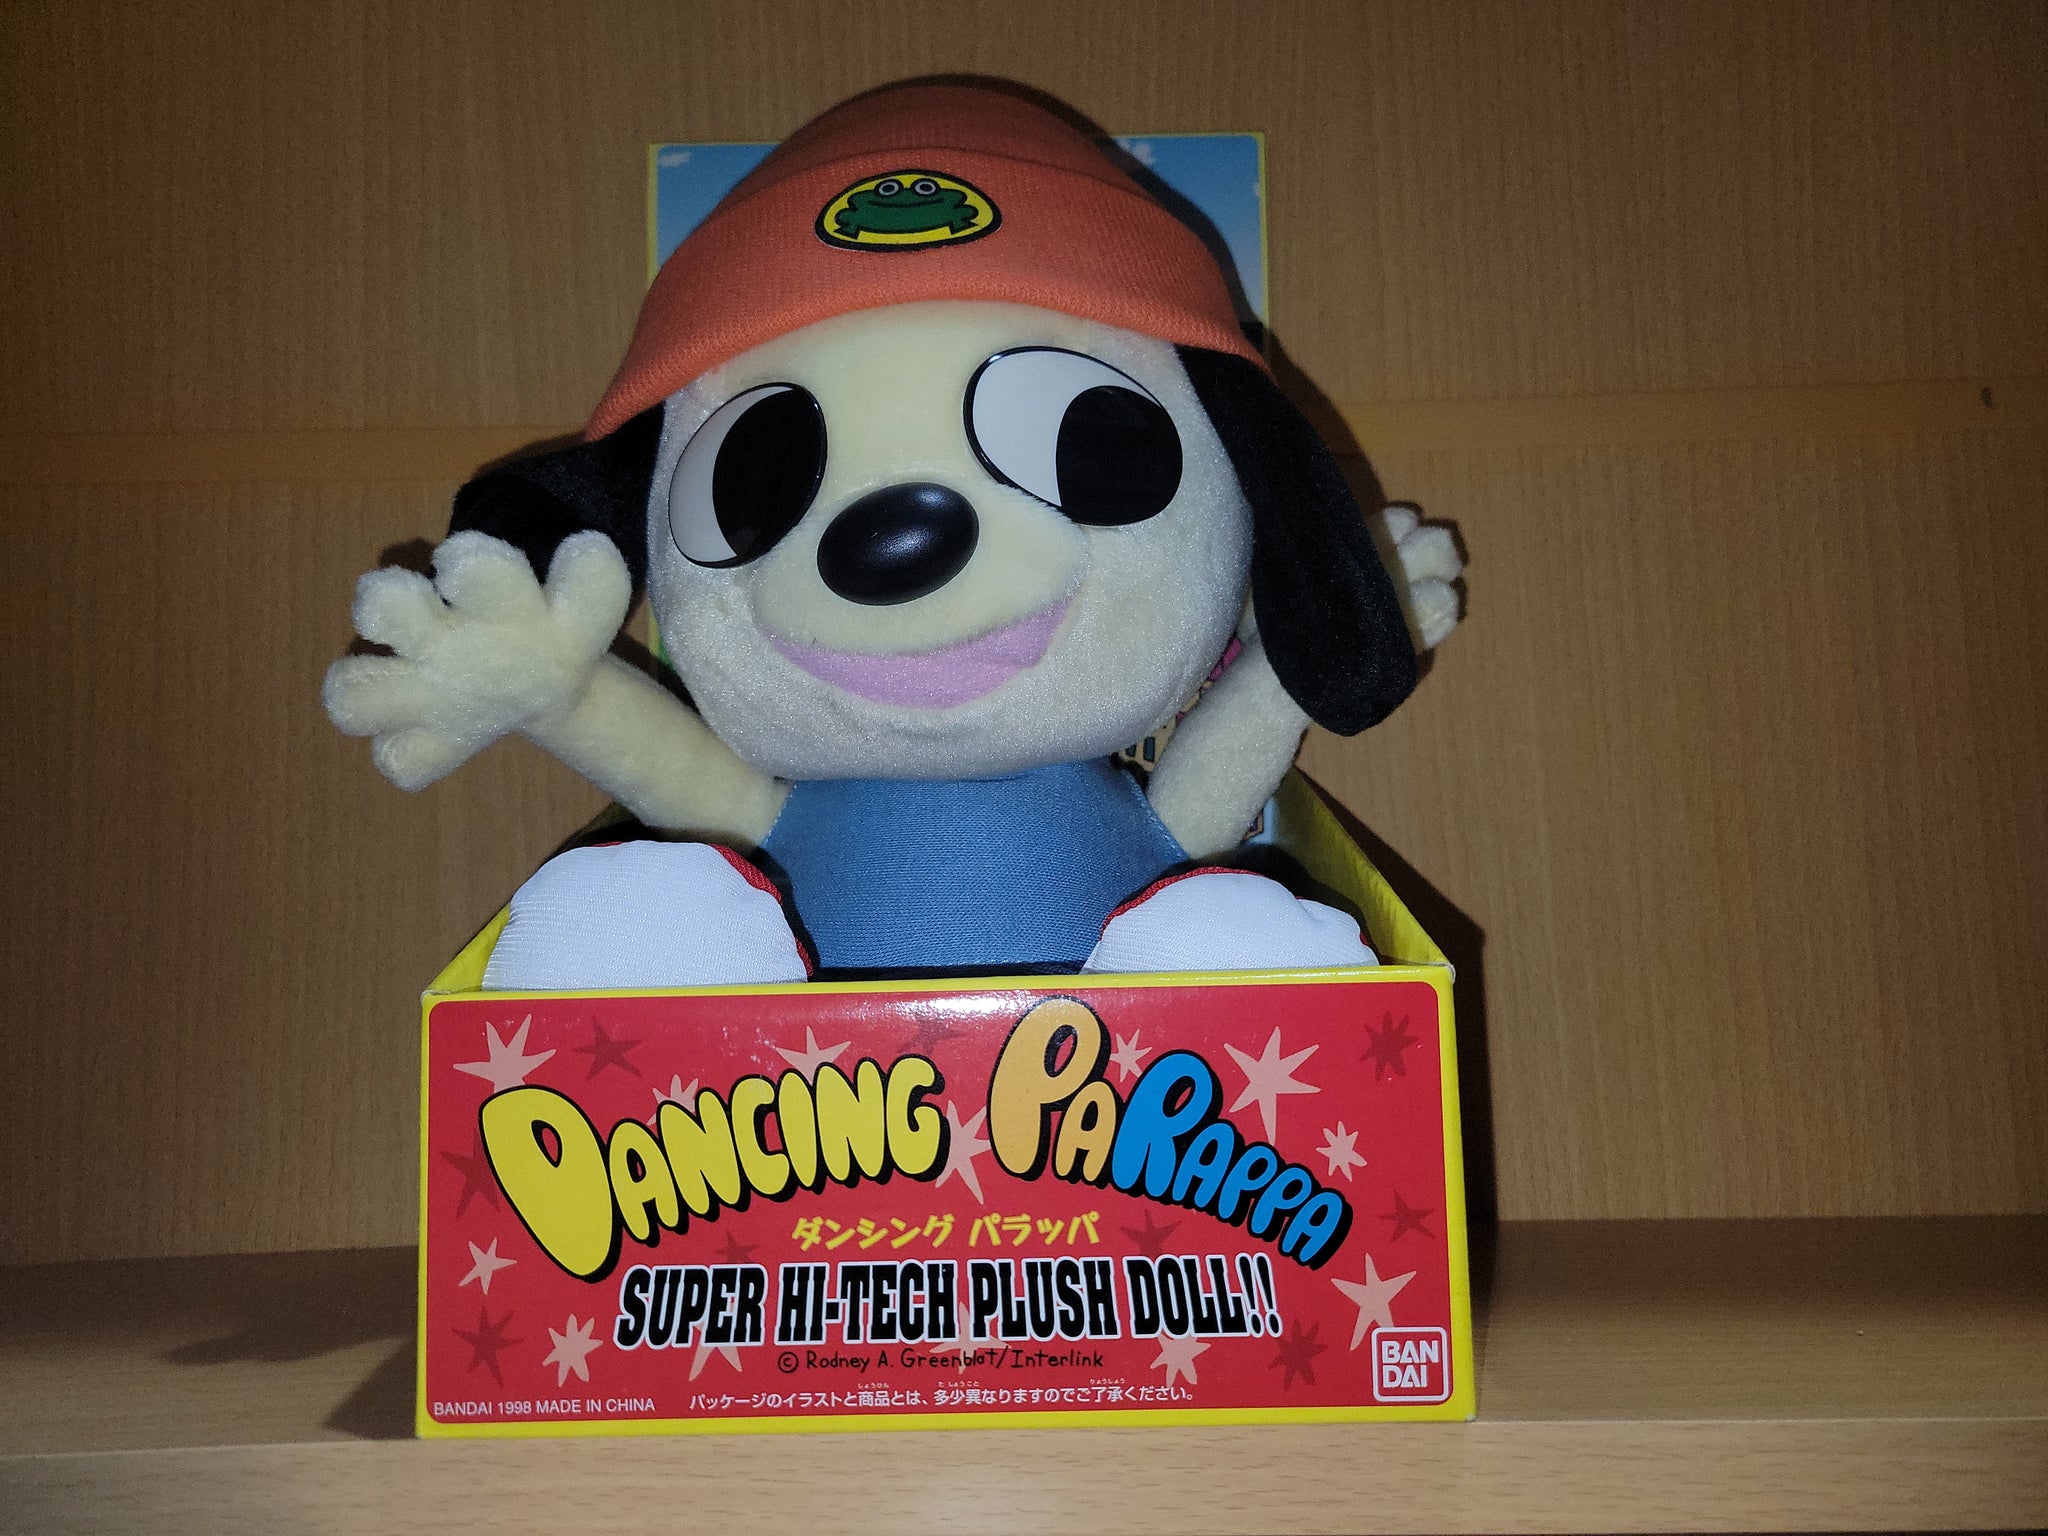 New PaRappa the Rapper Plush Toys Hot Game PaRappa the Rapper Plush Doll  Birthday Gifts For